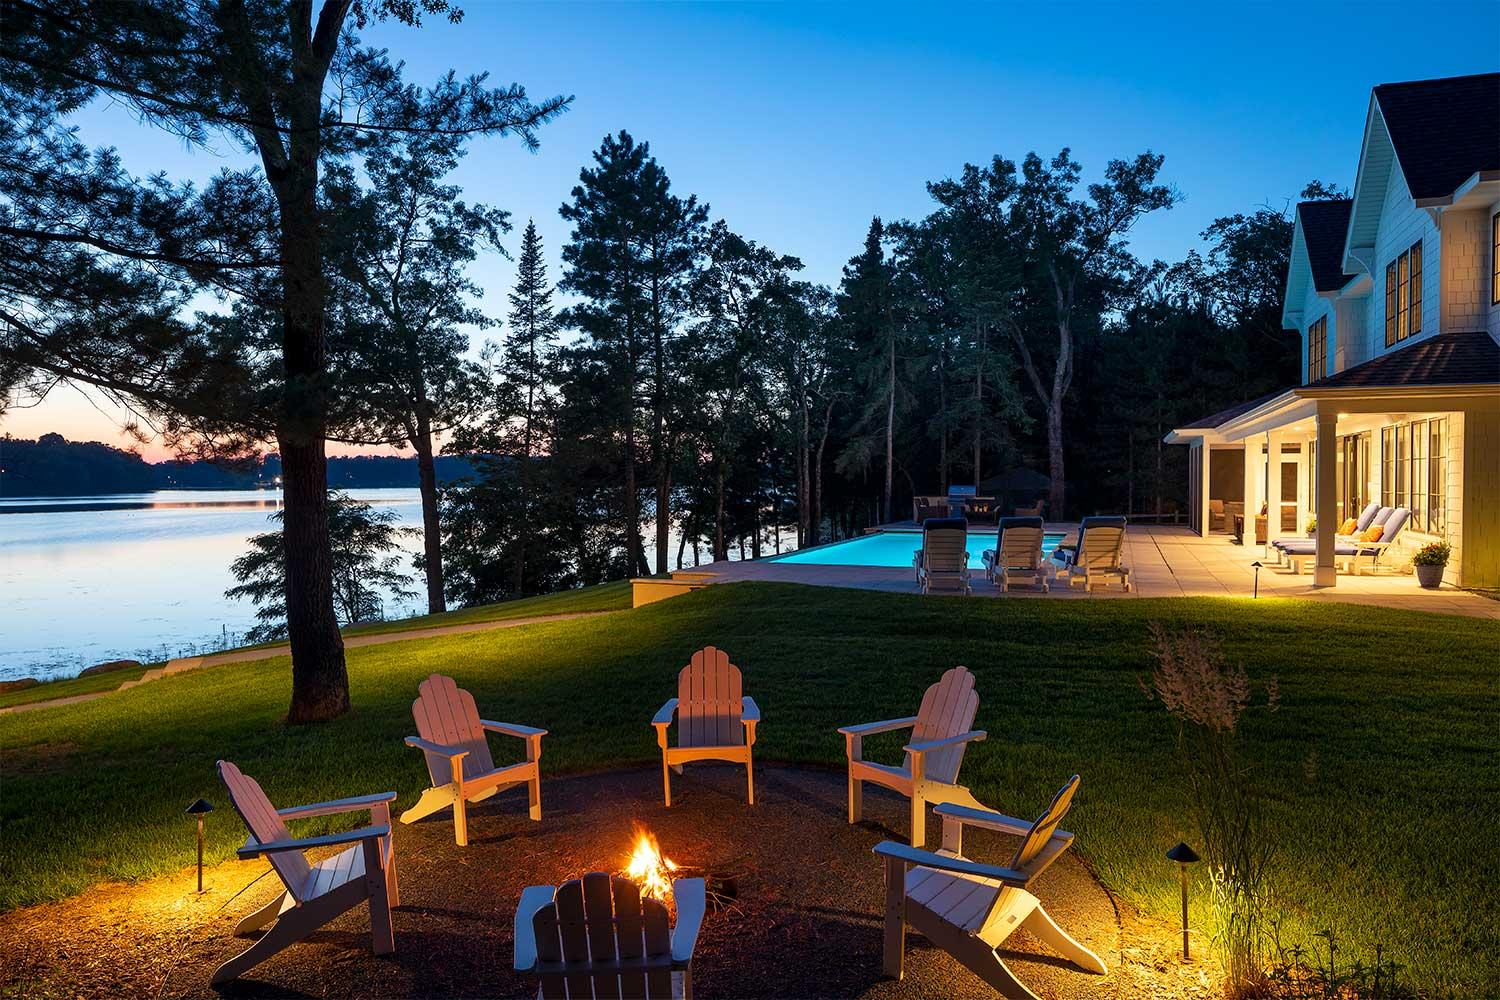 Northern Minnesota lakeshore landscape at dusk. A fire surrounded by a circle of white Adirondack chairs in the foreground, with the illuminated swimming pool and pool deck in the background.